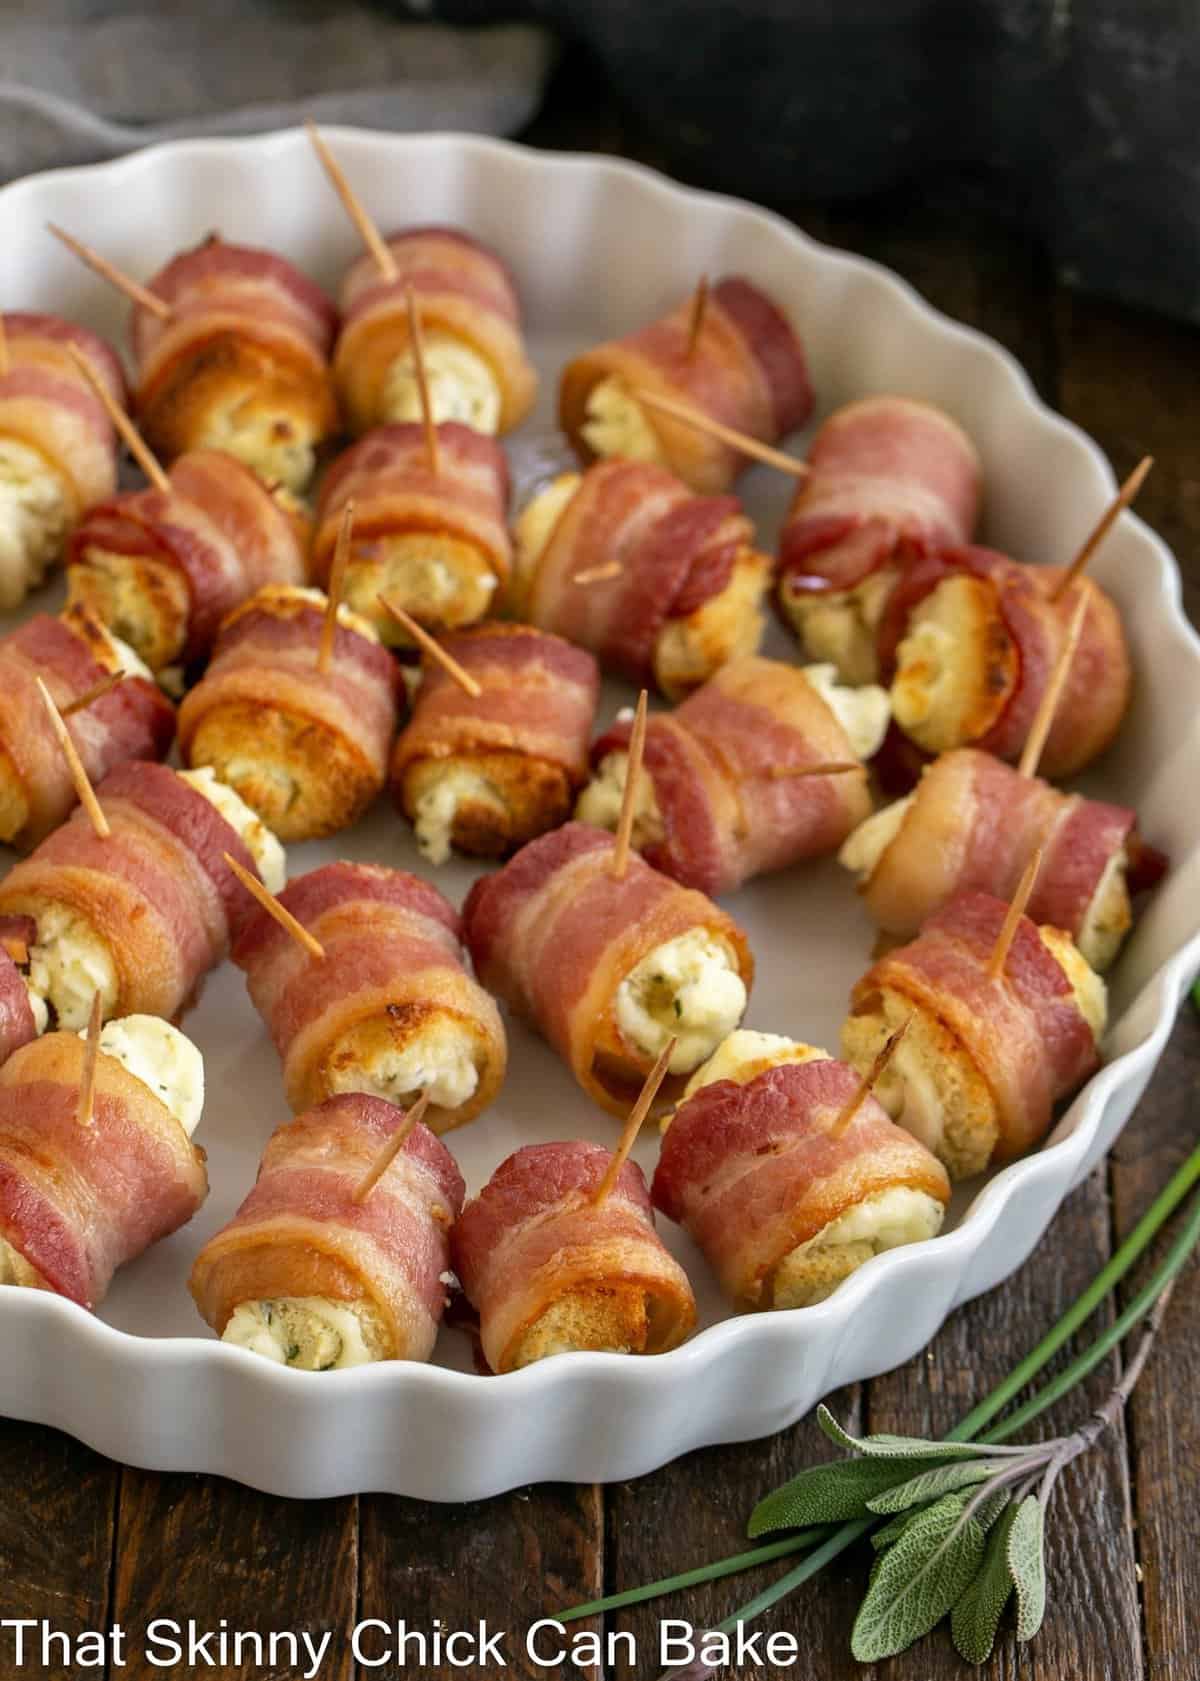 Overhead view of bacon and cheese rolls in a rimmed, white serving dish.